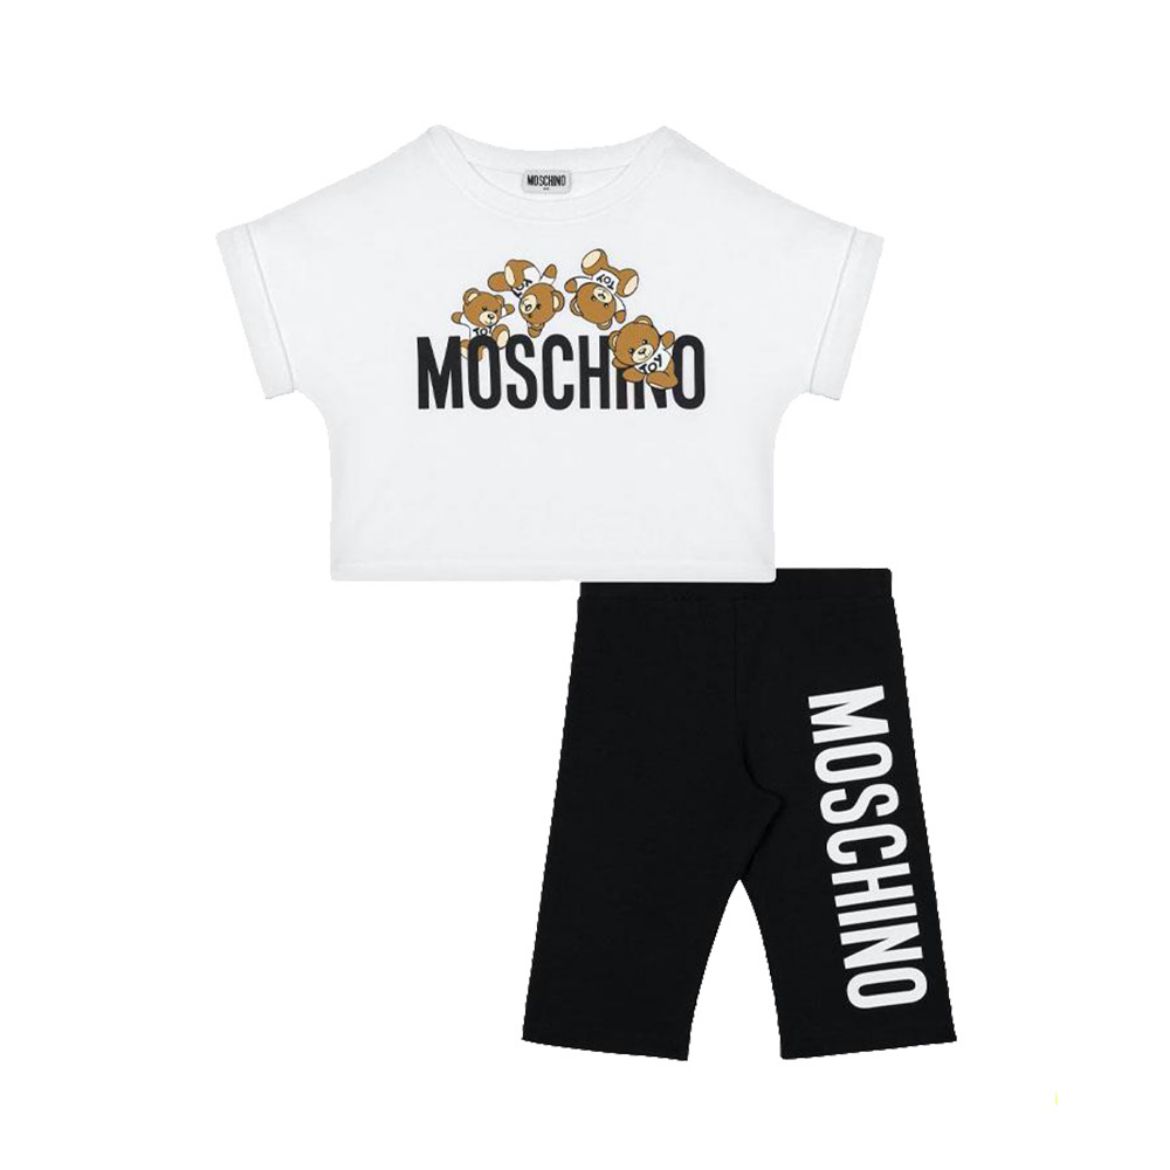 Picture of Moschino Girls Black & White Cycling Short Set